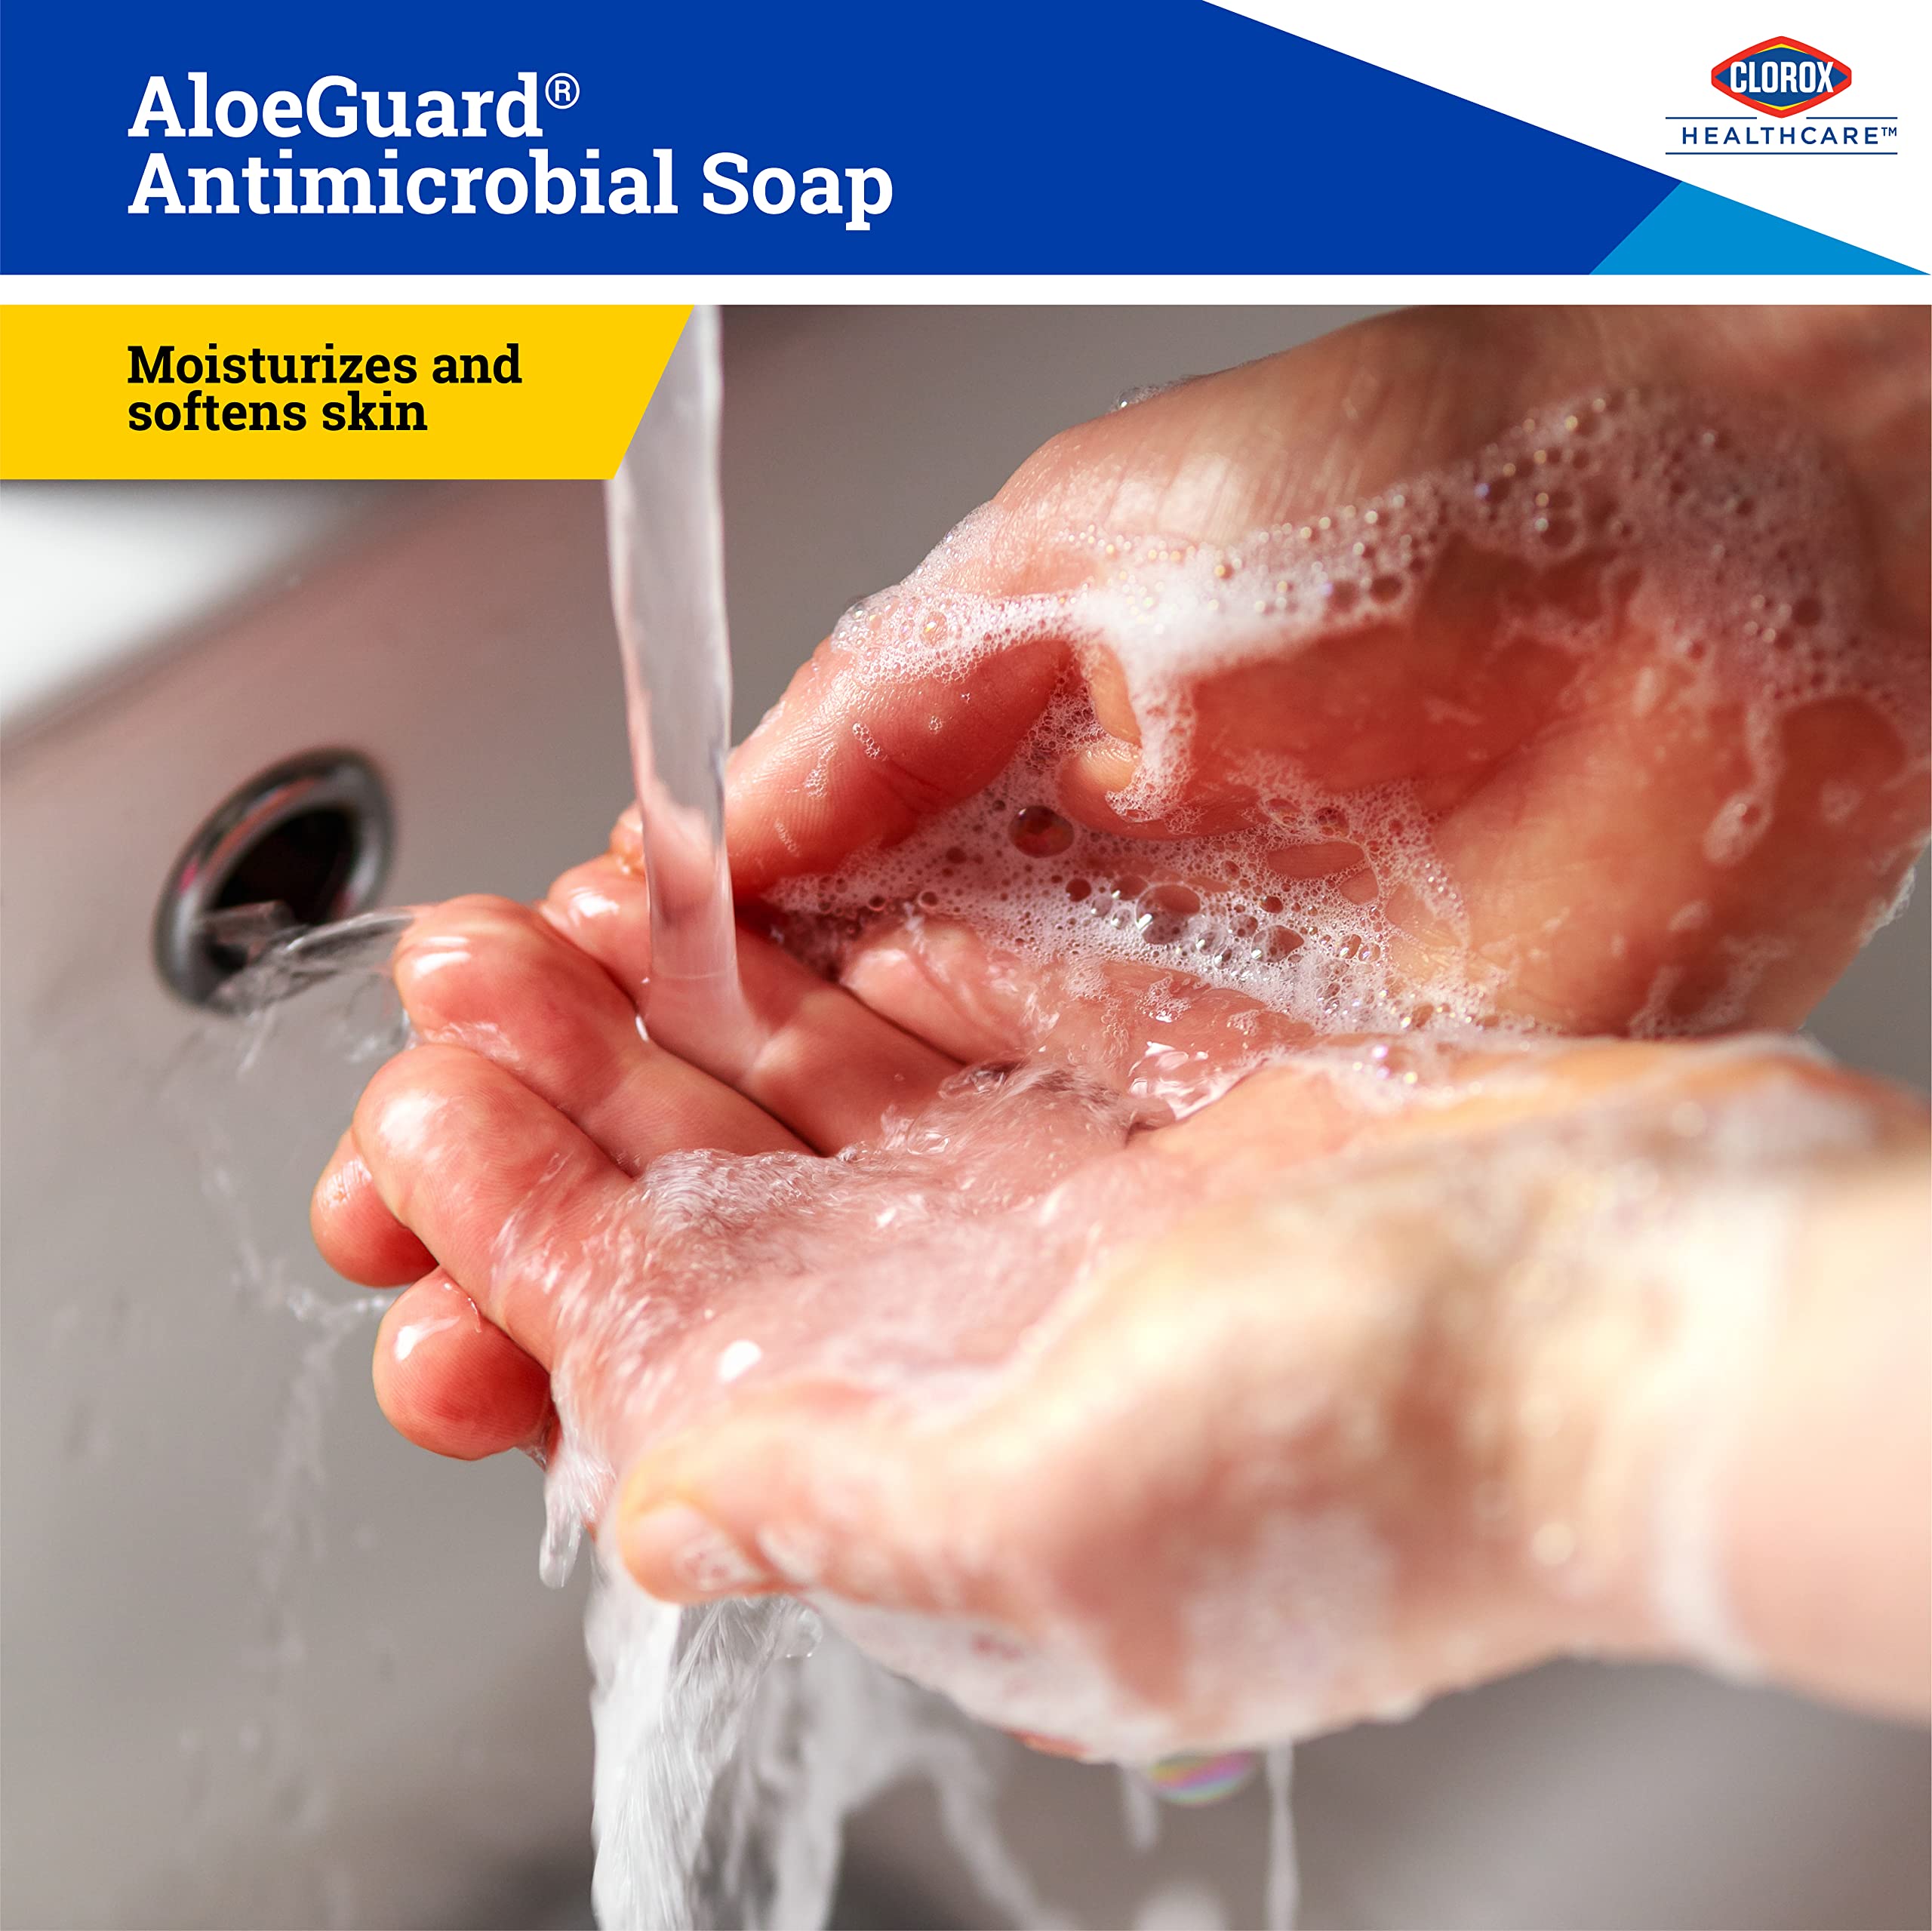 Clorox Healthcare AloeGuard Antimicrobial Soap, 1 Gallon Bottle | Antimicrobial Hand Soap for Healthcare Professionals and Everyday Use | Hand Soap Bulk (4 Pack)